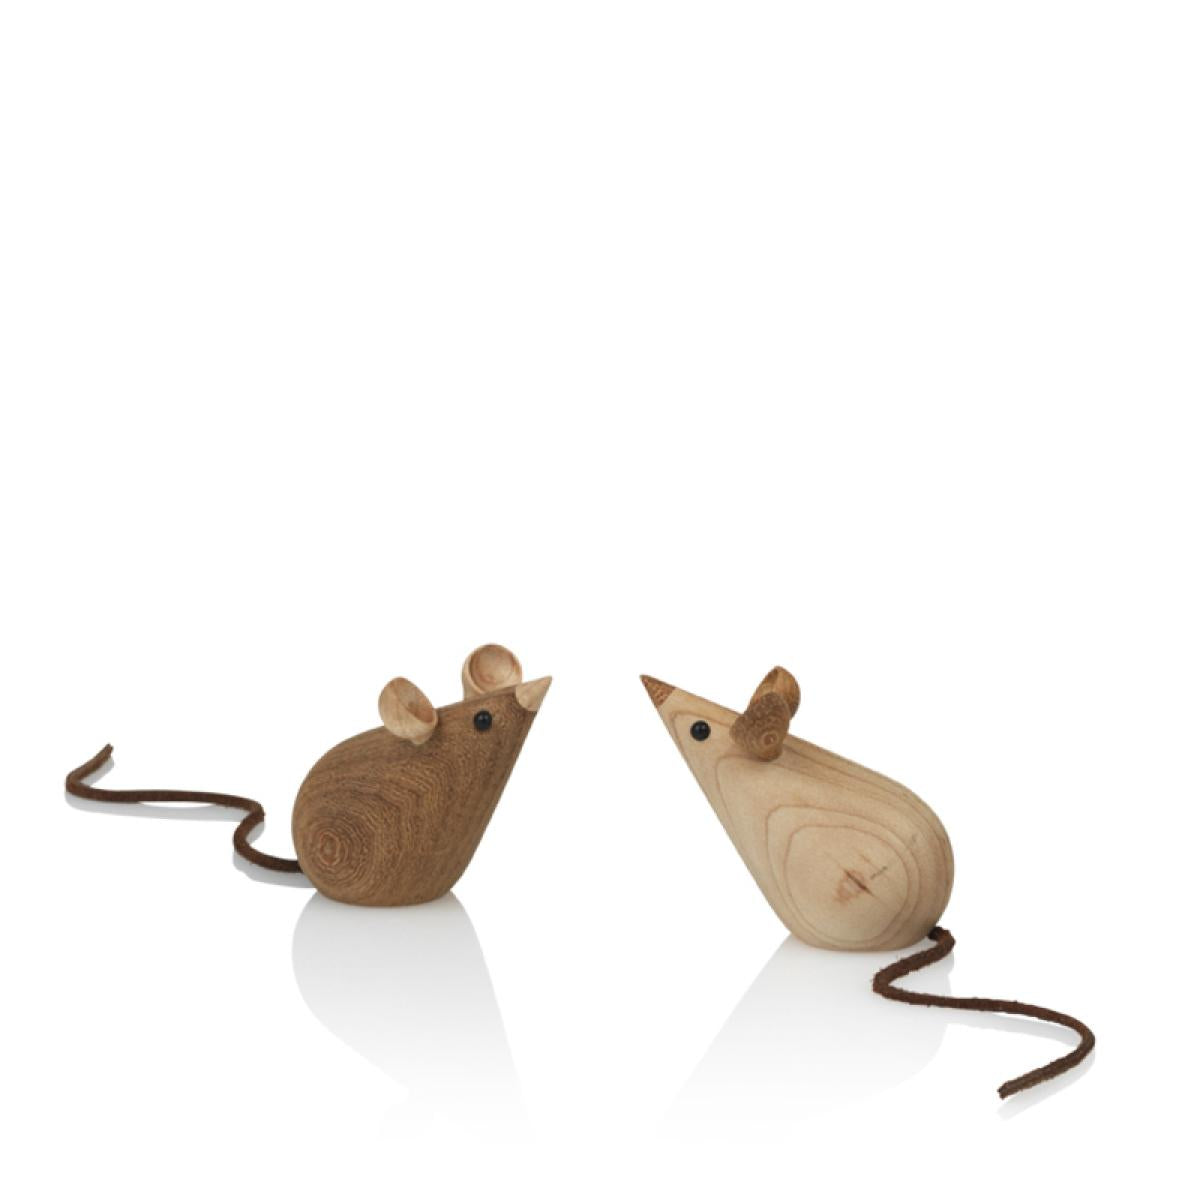 Skjode Mice (set of two) for Lucie Kaas